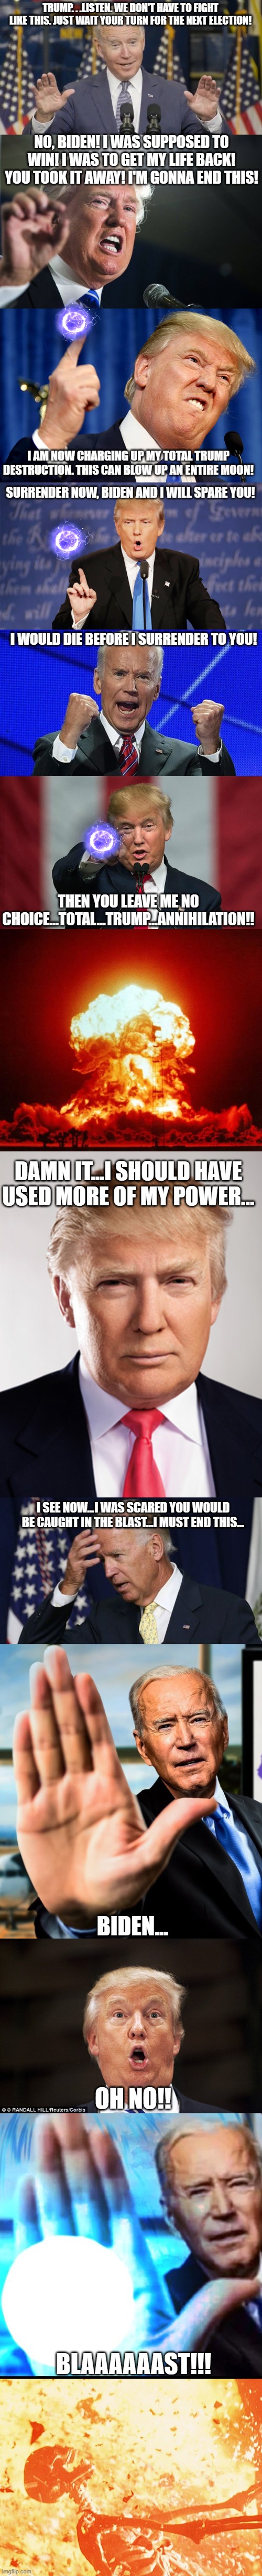 five upvoet and I post in politicsTOO and politics | TRUMP. . .LISTEN. WE DON'T HAVE TO FIGHT LIKE THIS. JUST WAIT YOUR TURN FOR THE NEXT ELECTION! NO, BIDEN! I WAS SUPPOSED TO WIN! I WAS TO GET MY LIFE BACK! YOU TOOK IT AWAY! I'M GONNA END THIS! I AM NOW CHARGING UP MY TOTAL TRUMP DESTRUCTION. THIS CAN BLOW UP AN ENTIRE M0ON! SURRENDER NOW, BIDEN AND I WILL SPARE YOU! I WOULD DIE BEFORE I SURRENDER TO YOU! THEN YOU LEAVE ME NO CHOICE...TOTAL...TRUMP...ANNIHILATION!! DAMN IT...I SHOULD HAVE USED MORE OF MY POWER... I SEE NOW...I WAS SCARED YOU WOULD BE CAUGHT IN THE BLAST...I MUST END THIS... BIDEN... OH NO!! BLAAAAAAST!!! | image tagged in cocky joe biden,donald trump,donald trump wrong,joe biden fists angry,donald trump birthday | made w/ Imgflip meme maker